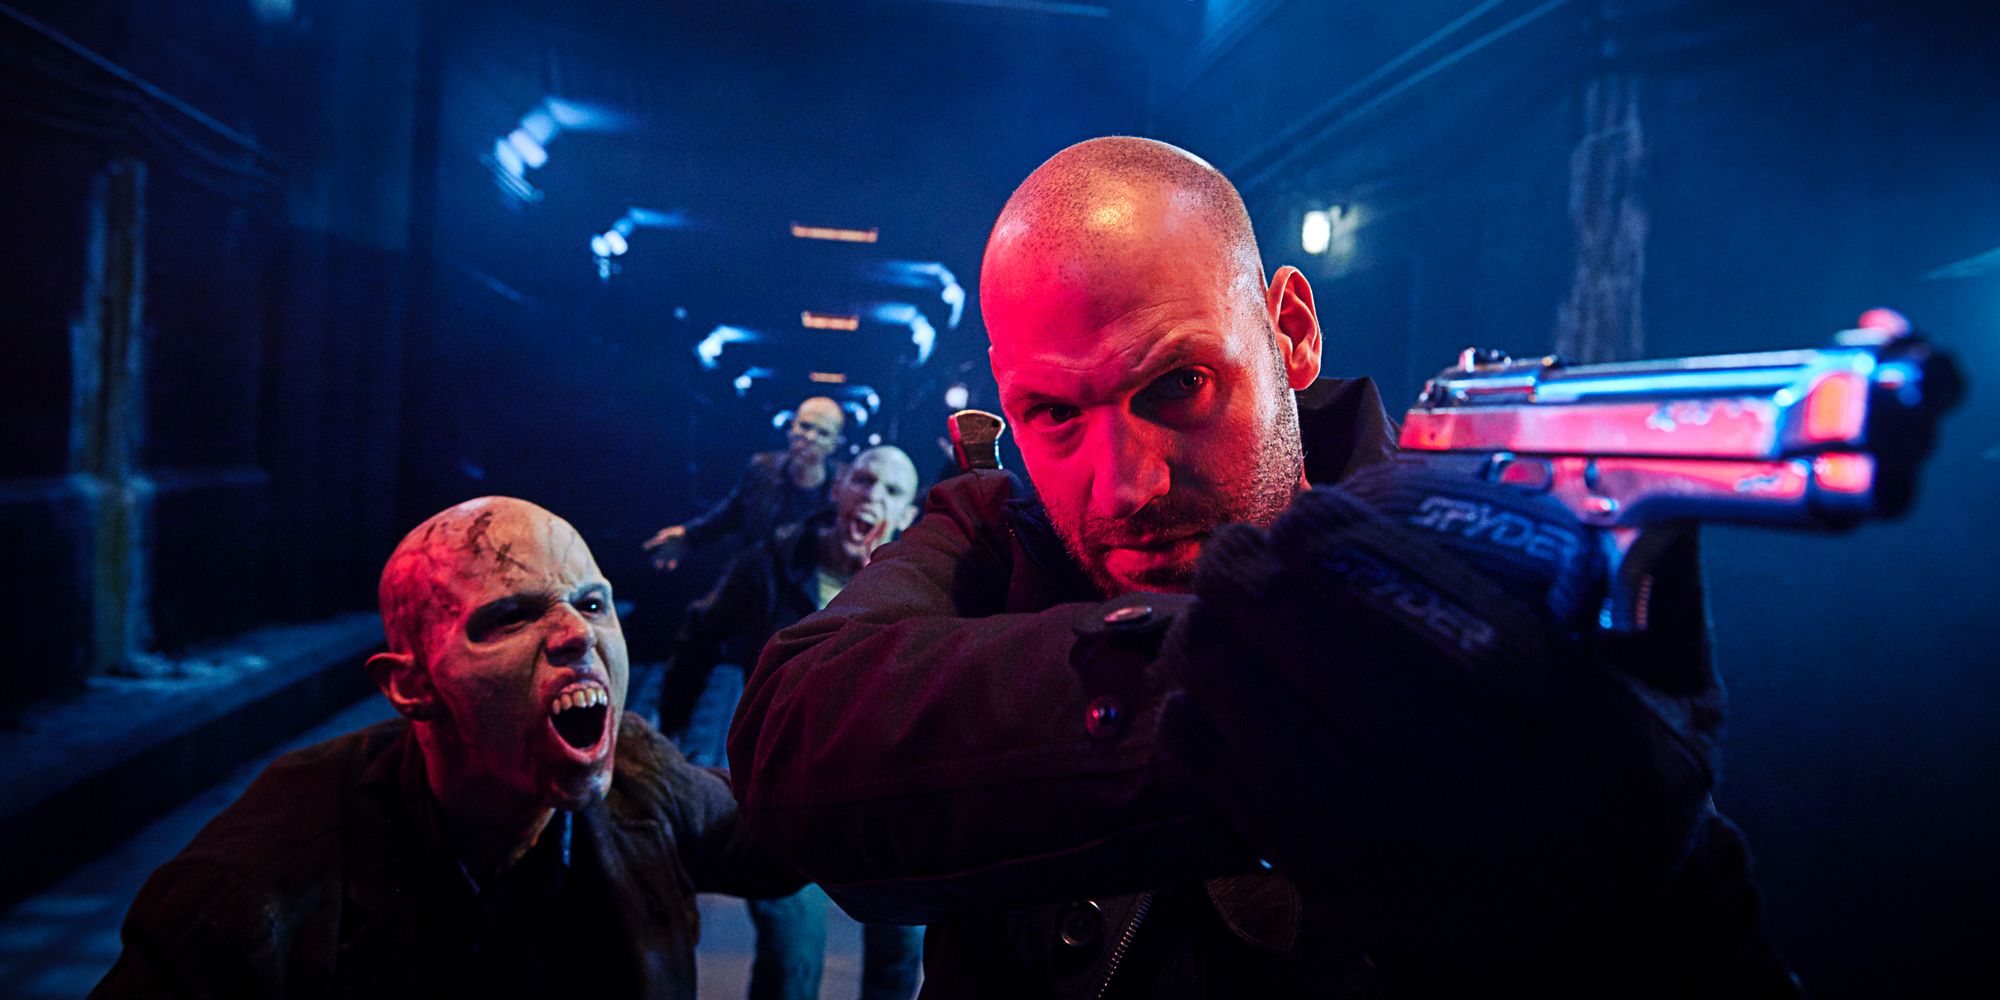 Corey Stoll in The Strain Seaon 3